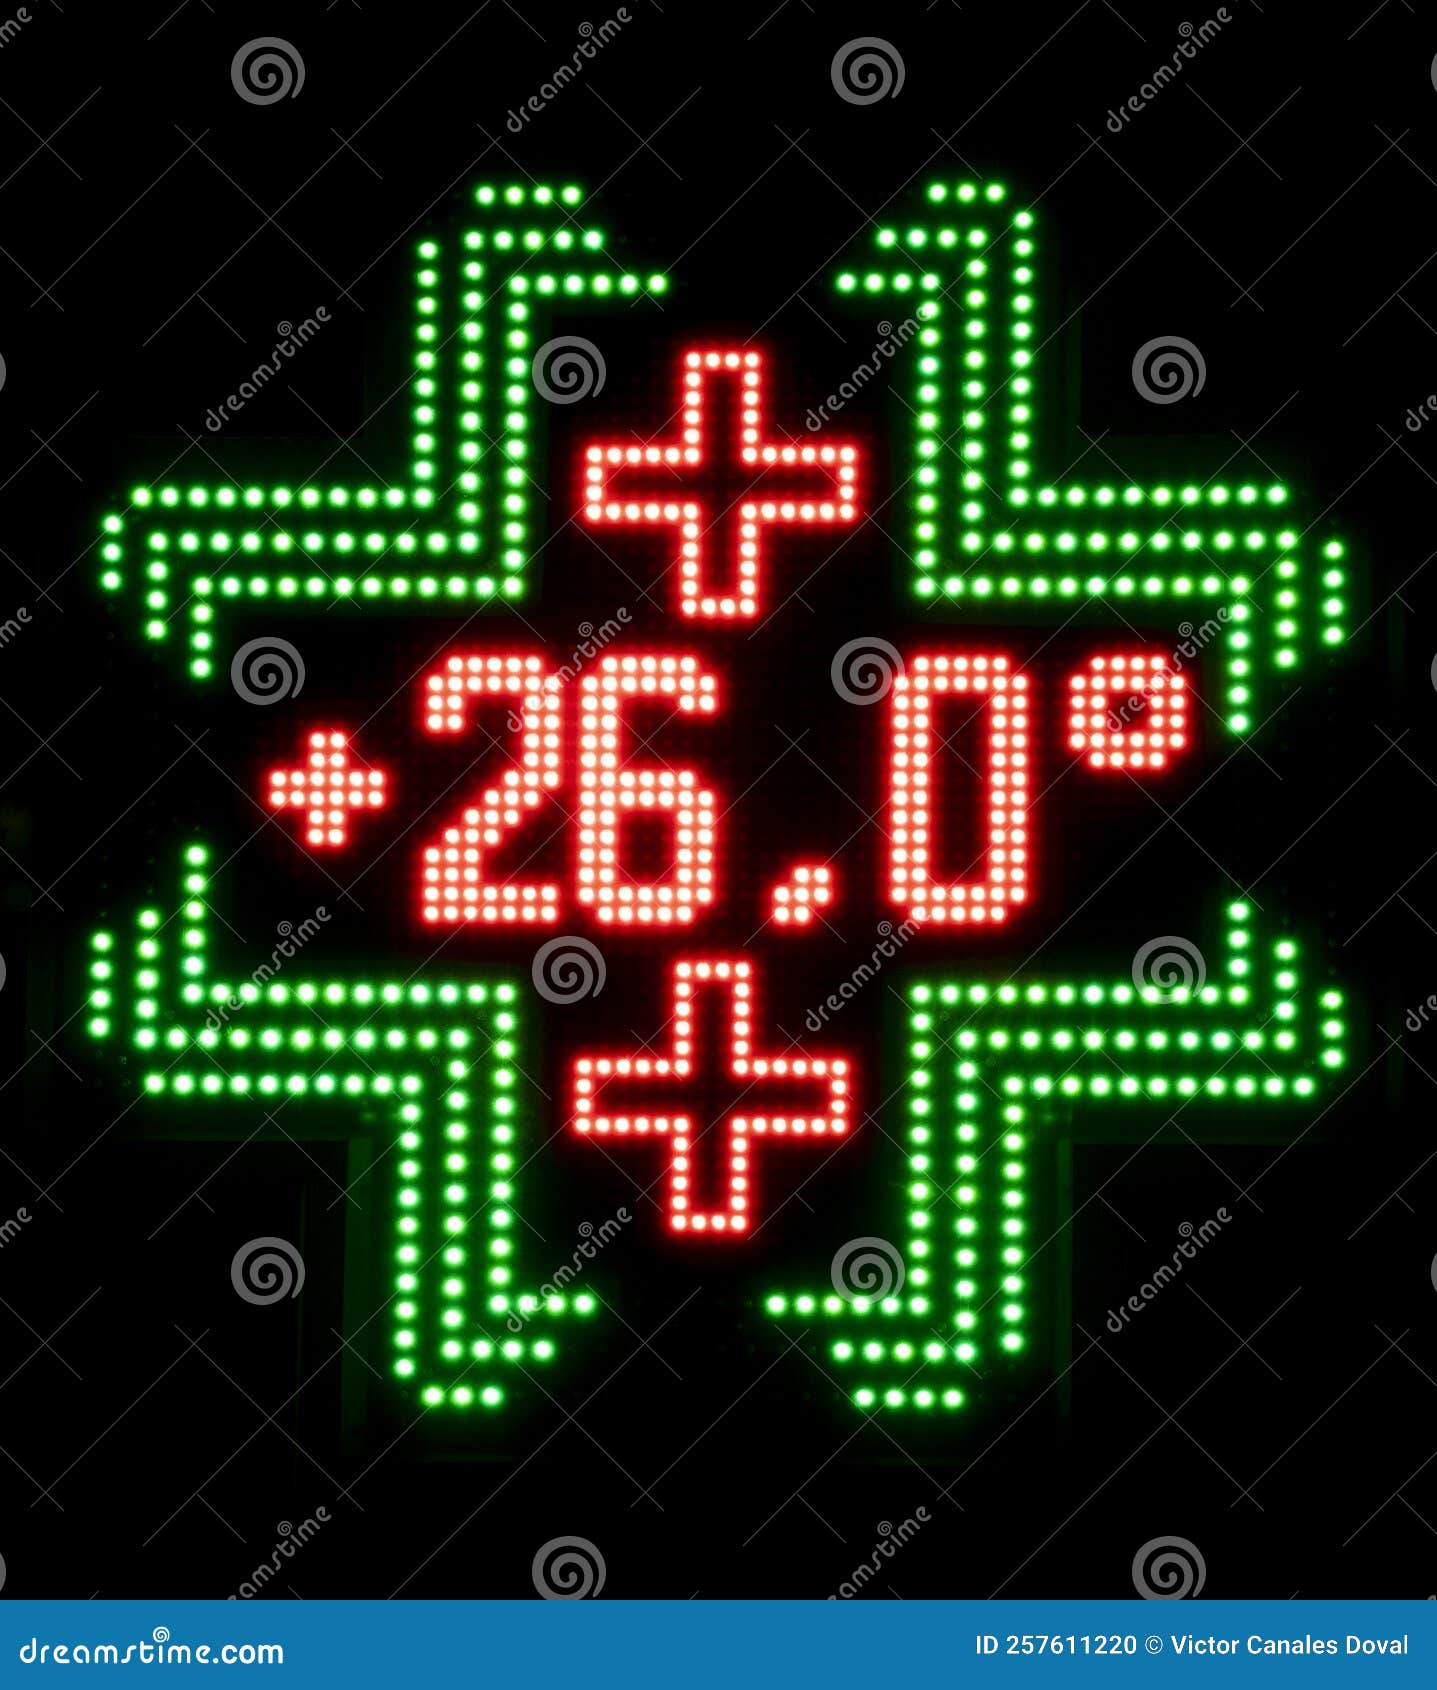 Pharmacy LED Panel Shows a Temperature of 26 Degrees Celsius at